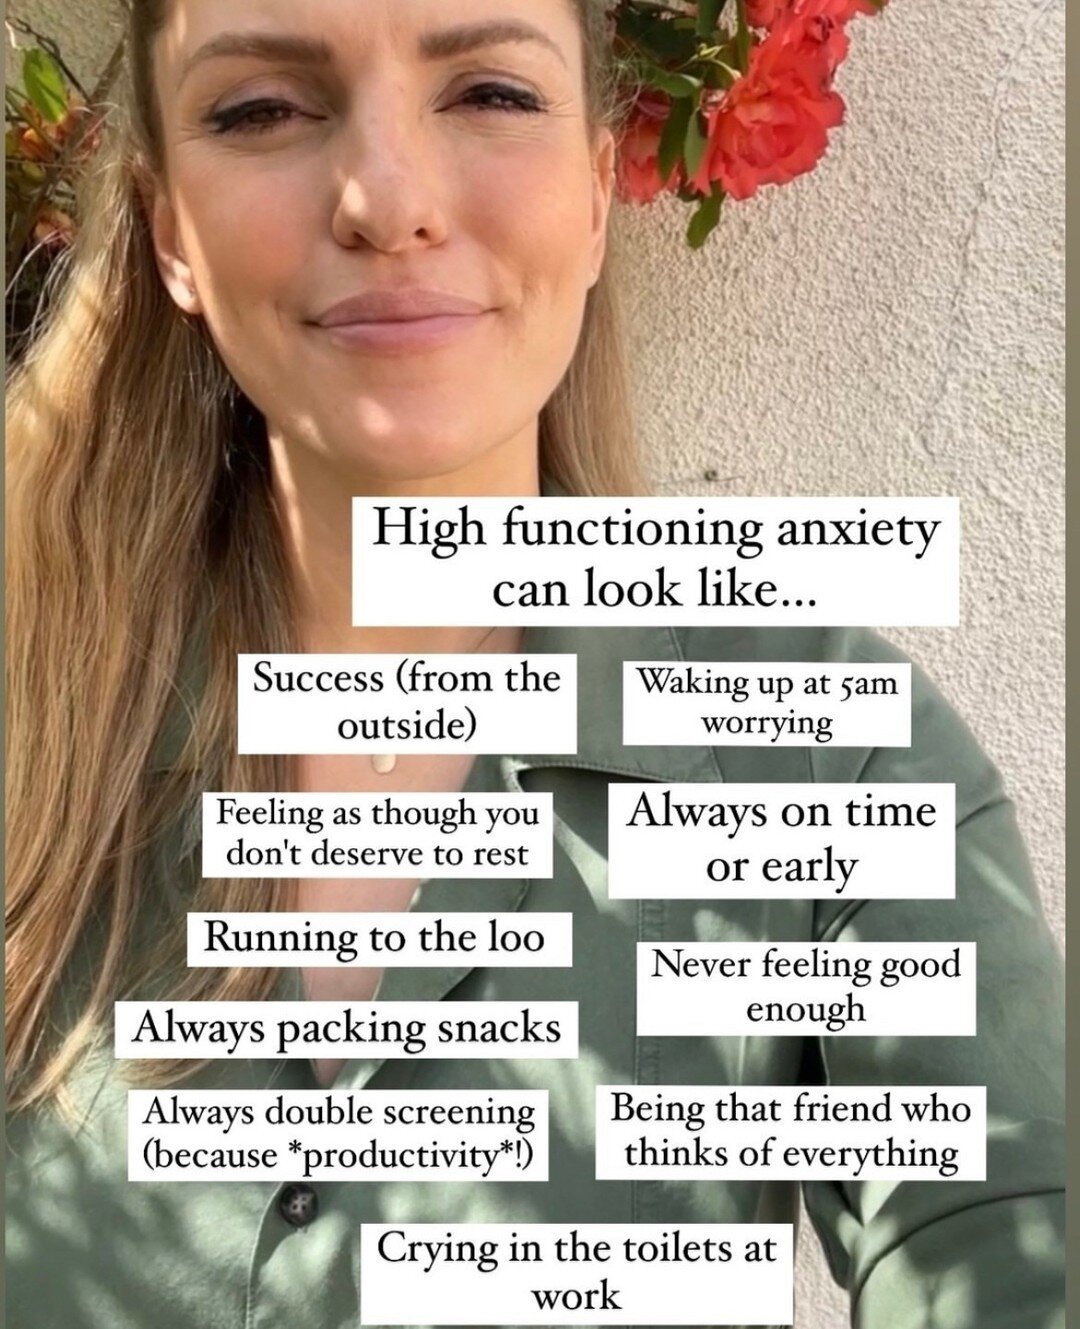 Hands up who feels seen looking at this image from anxiety expert Chloe Brotheridge?! 😳⁠
⁠
And who can relate to more than one or two of these symptoms of 'High Functioning Anxiety'?⁠
⁠
The good news is that - if they're not serving you - these feel